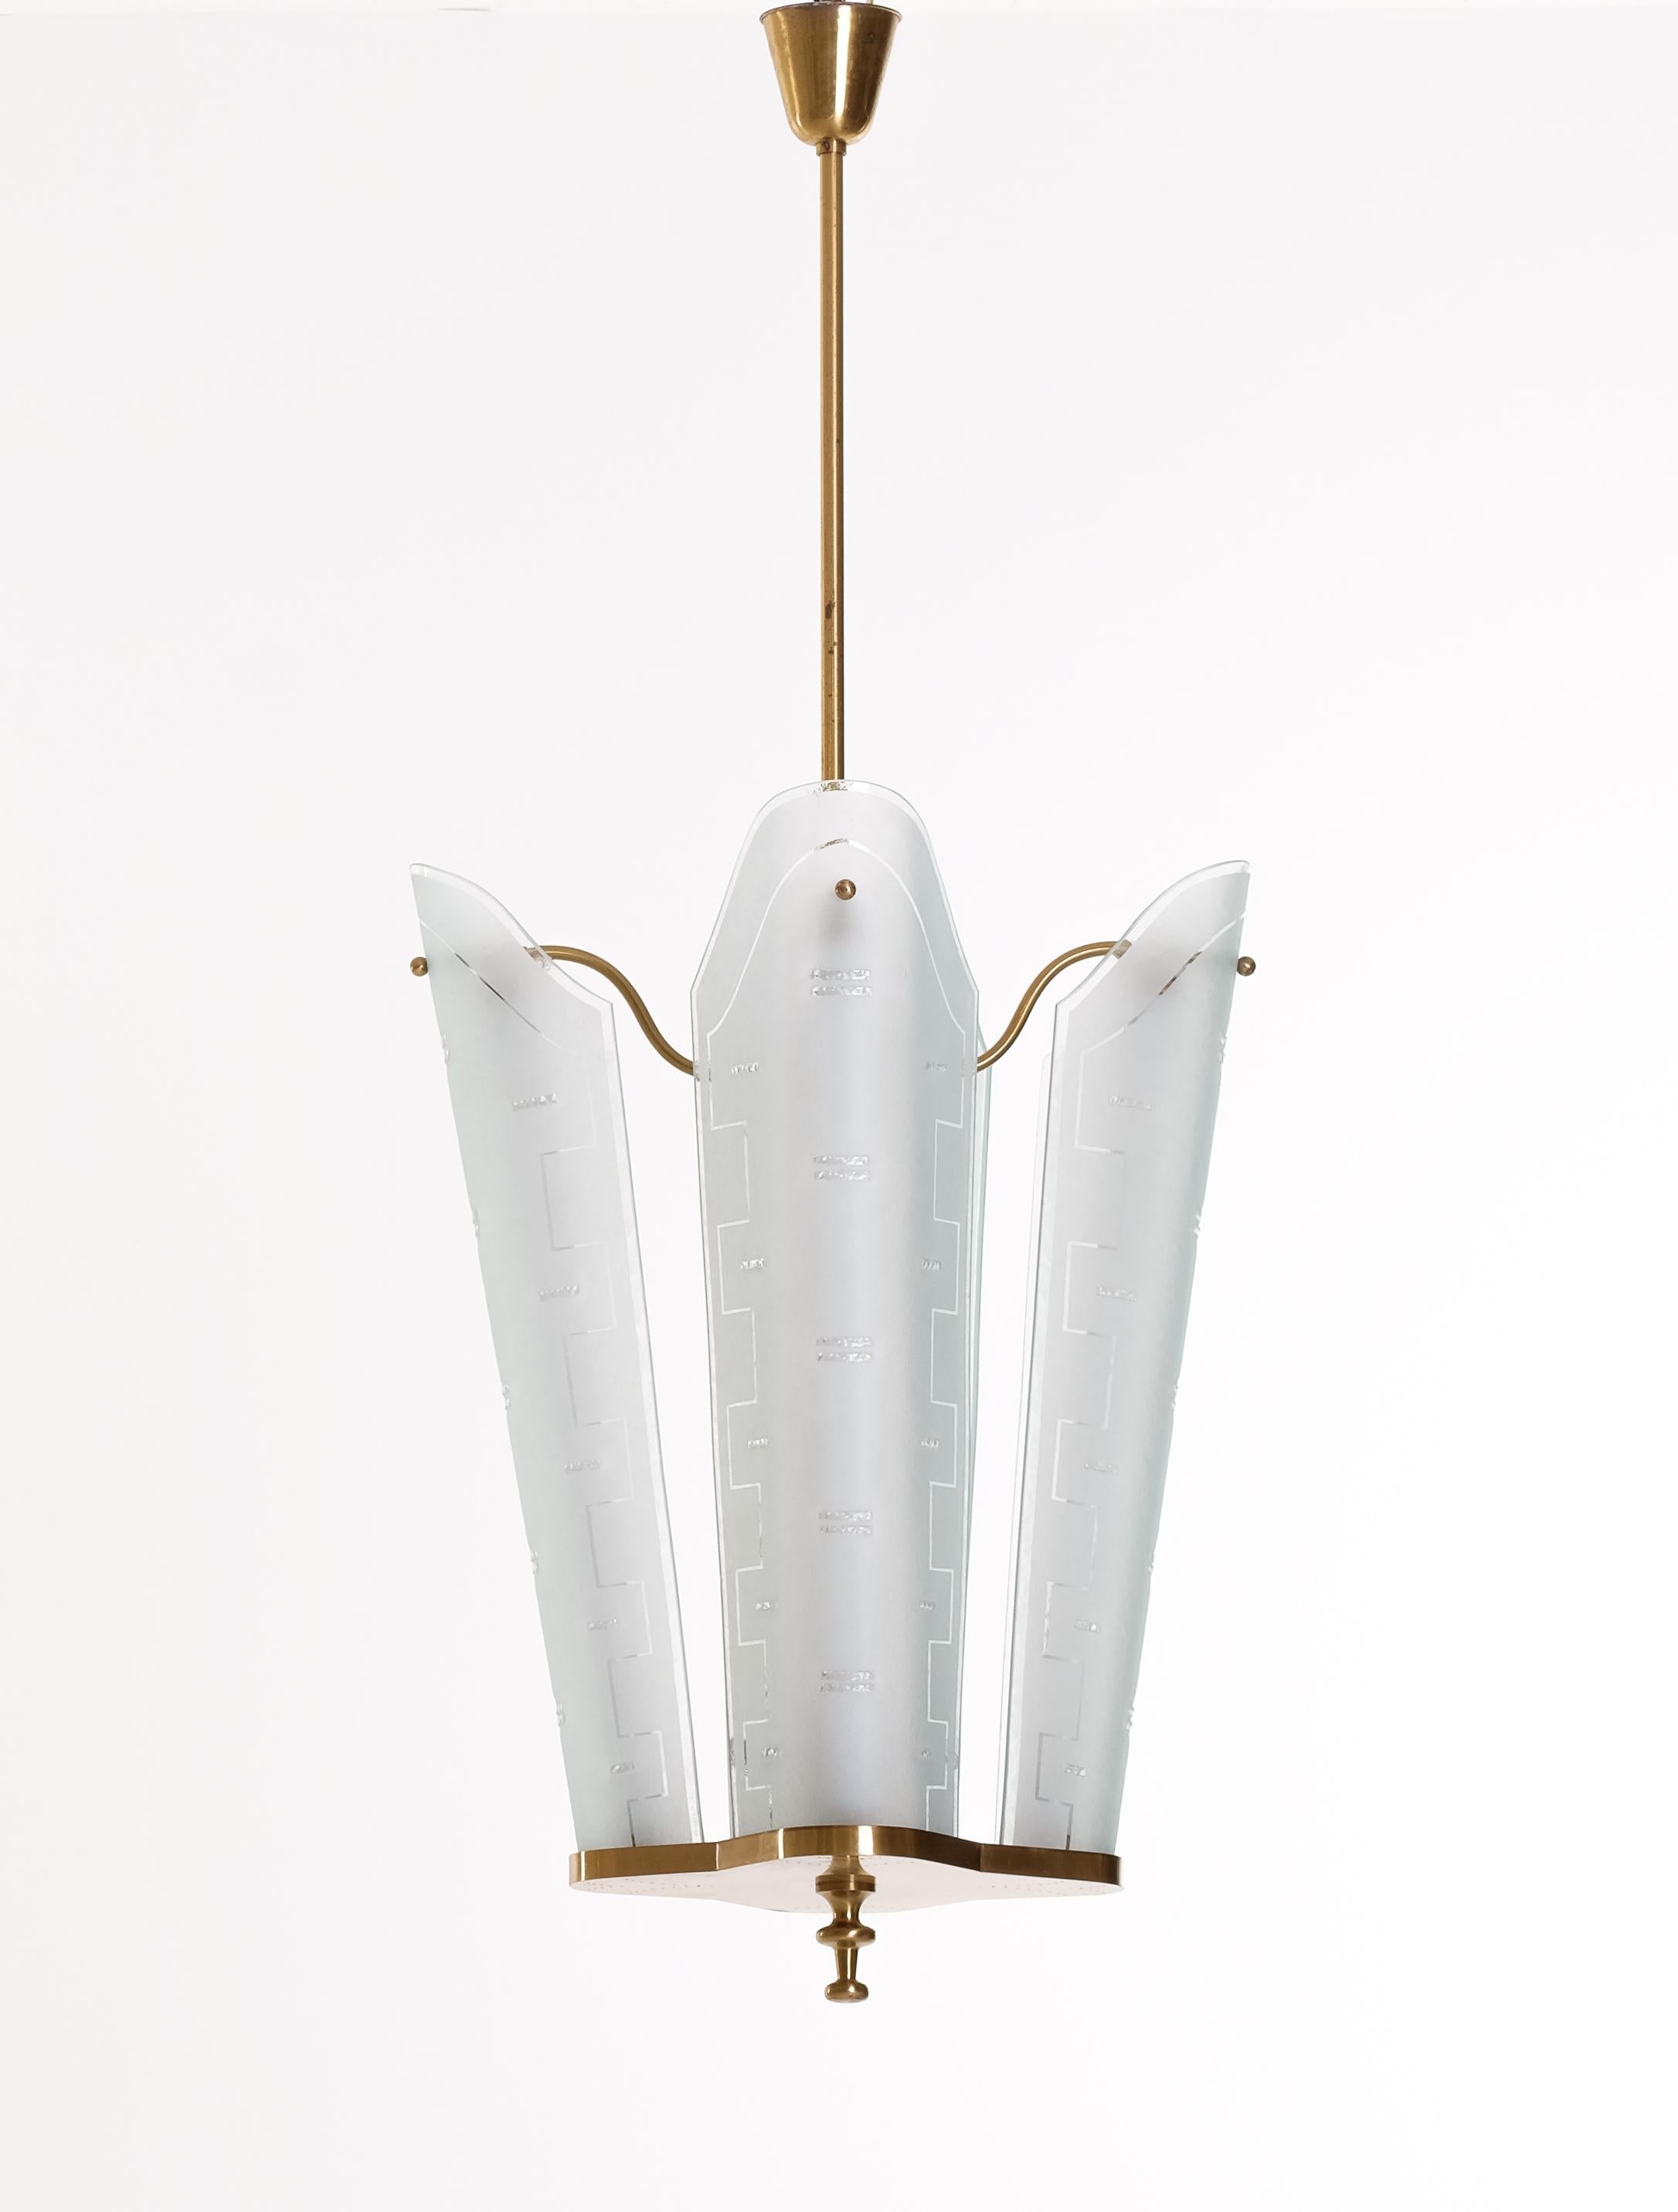 Glass Bo Notini Ceiling Lamps by Glössner, Sweden, 1950s For Sale